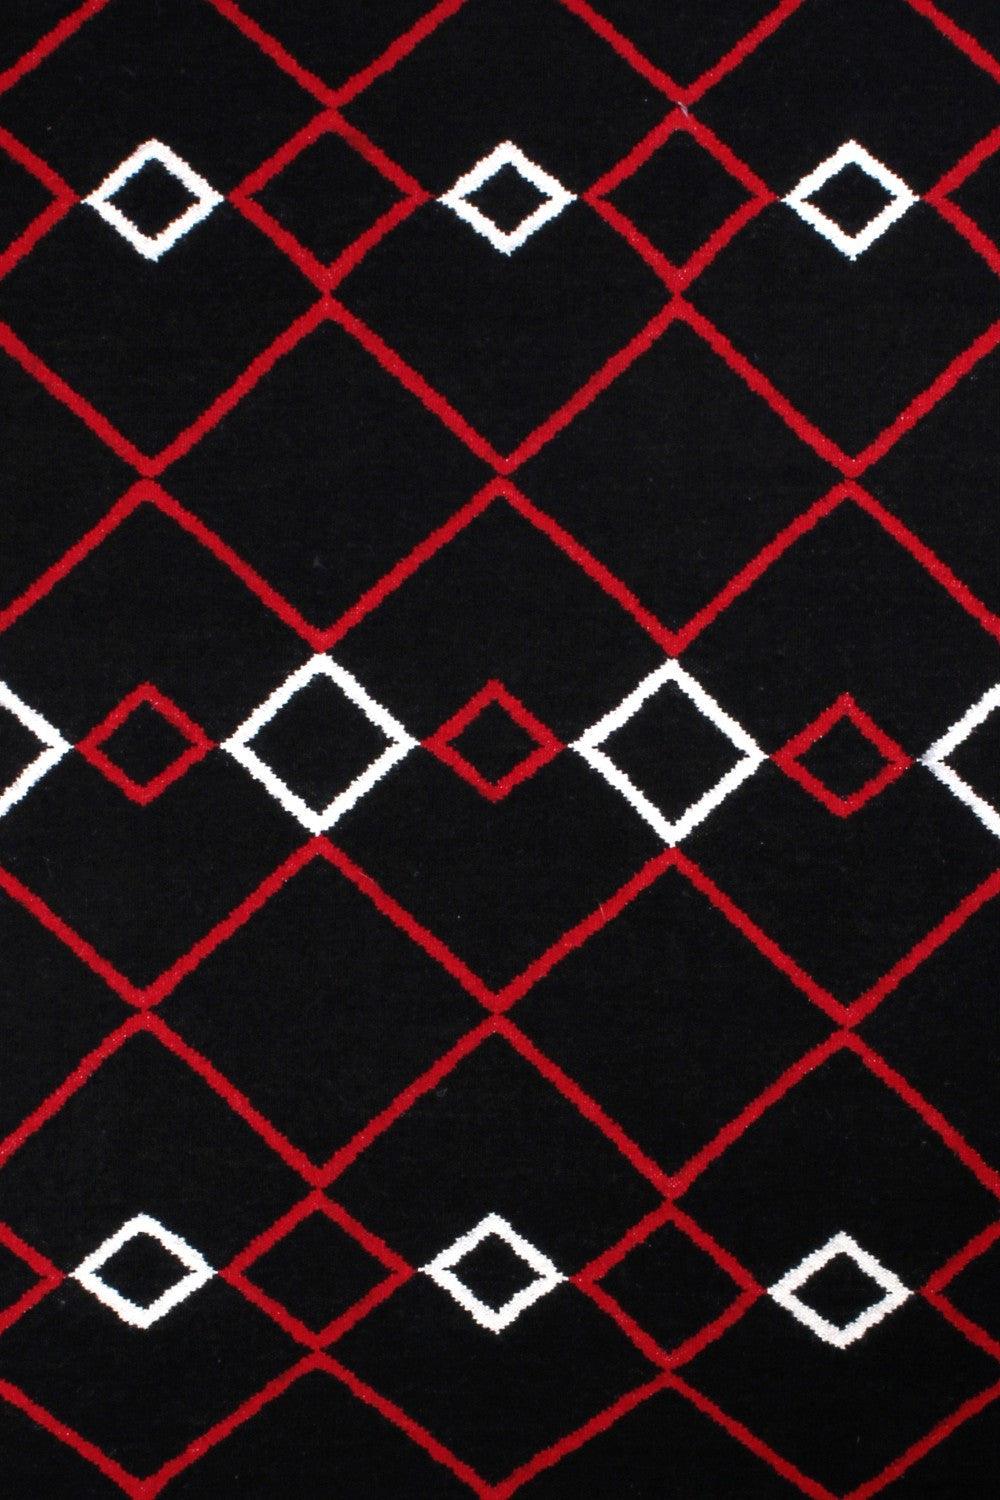 Close-up product shot of Wool Handwoven Rug Vera Red, highlighting its intricate handwoven patterns.